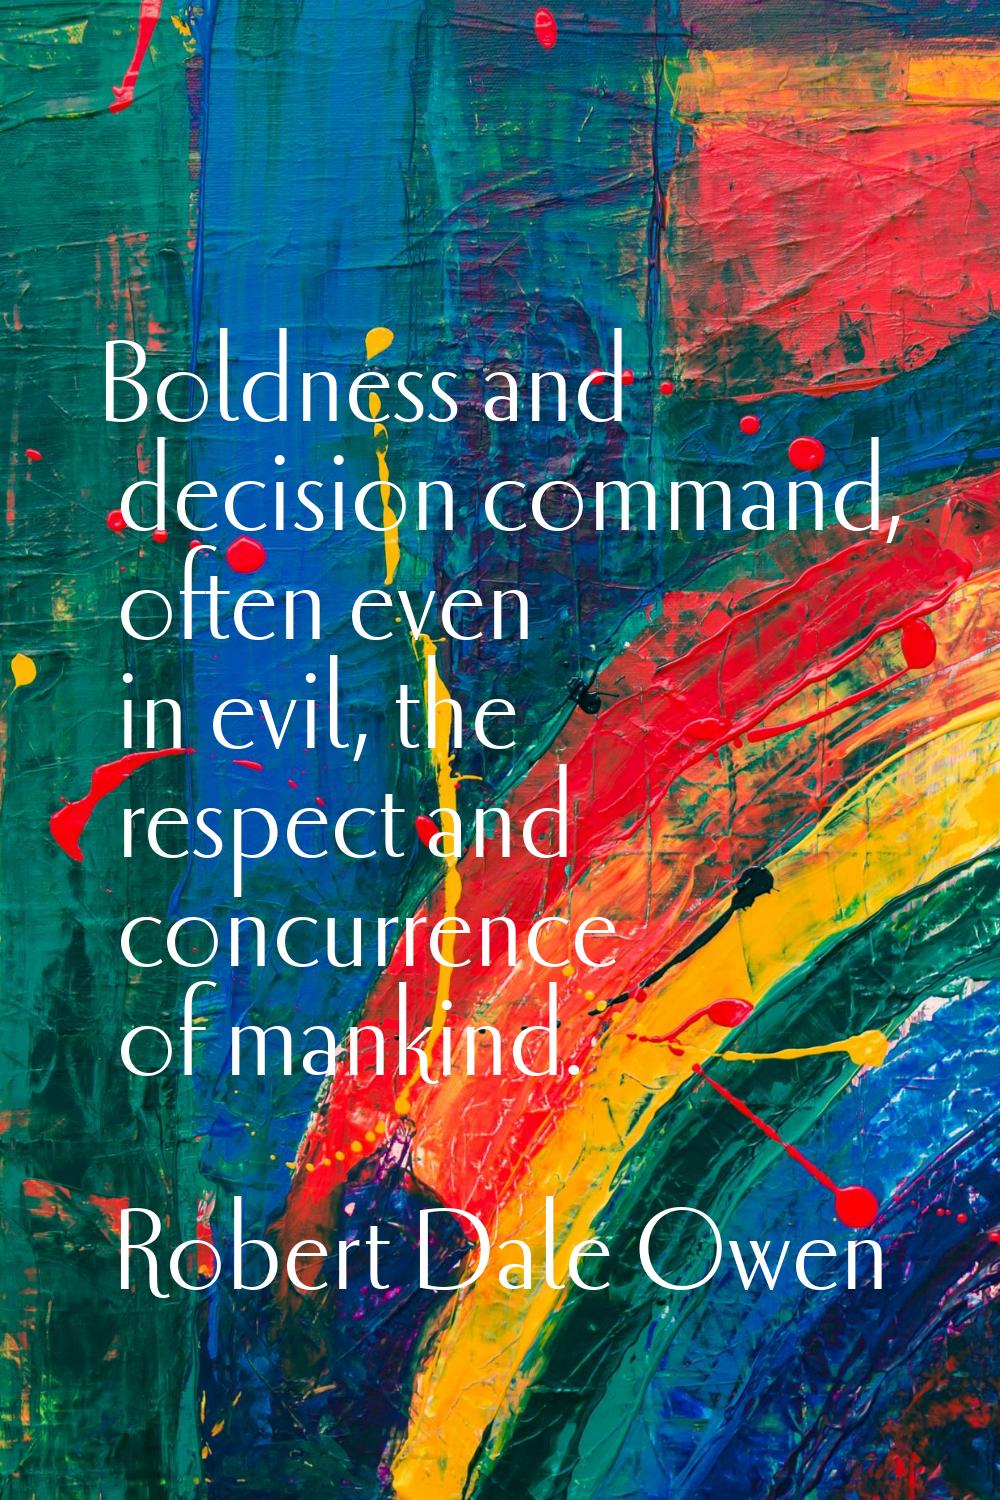 Boldness and decision command, often even in evil, the respect and concurrence of mankind.